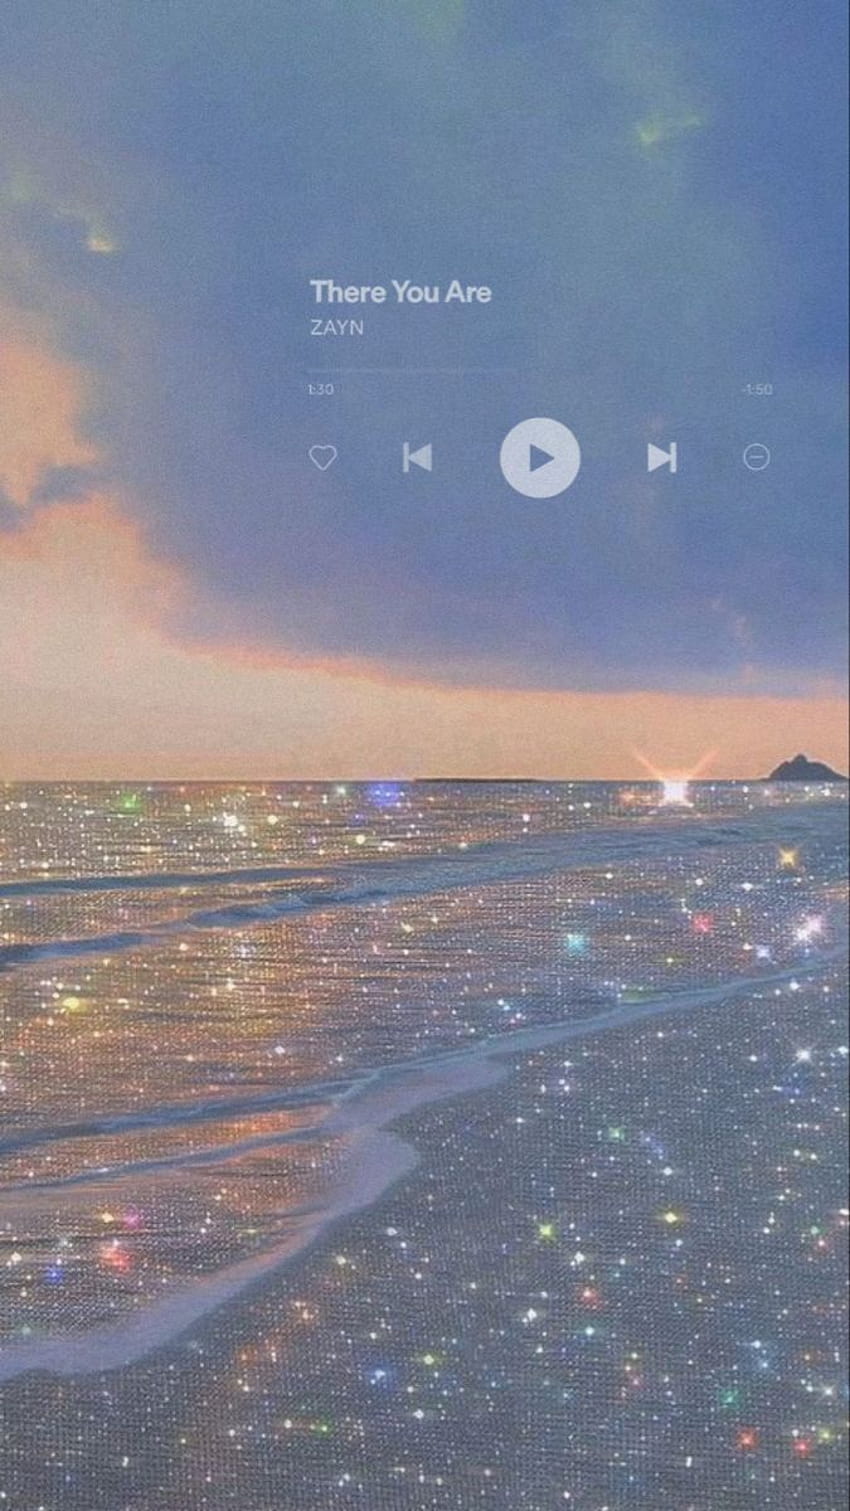 There is a picture of the ocean with stars - Spotify